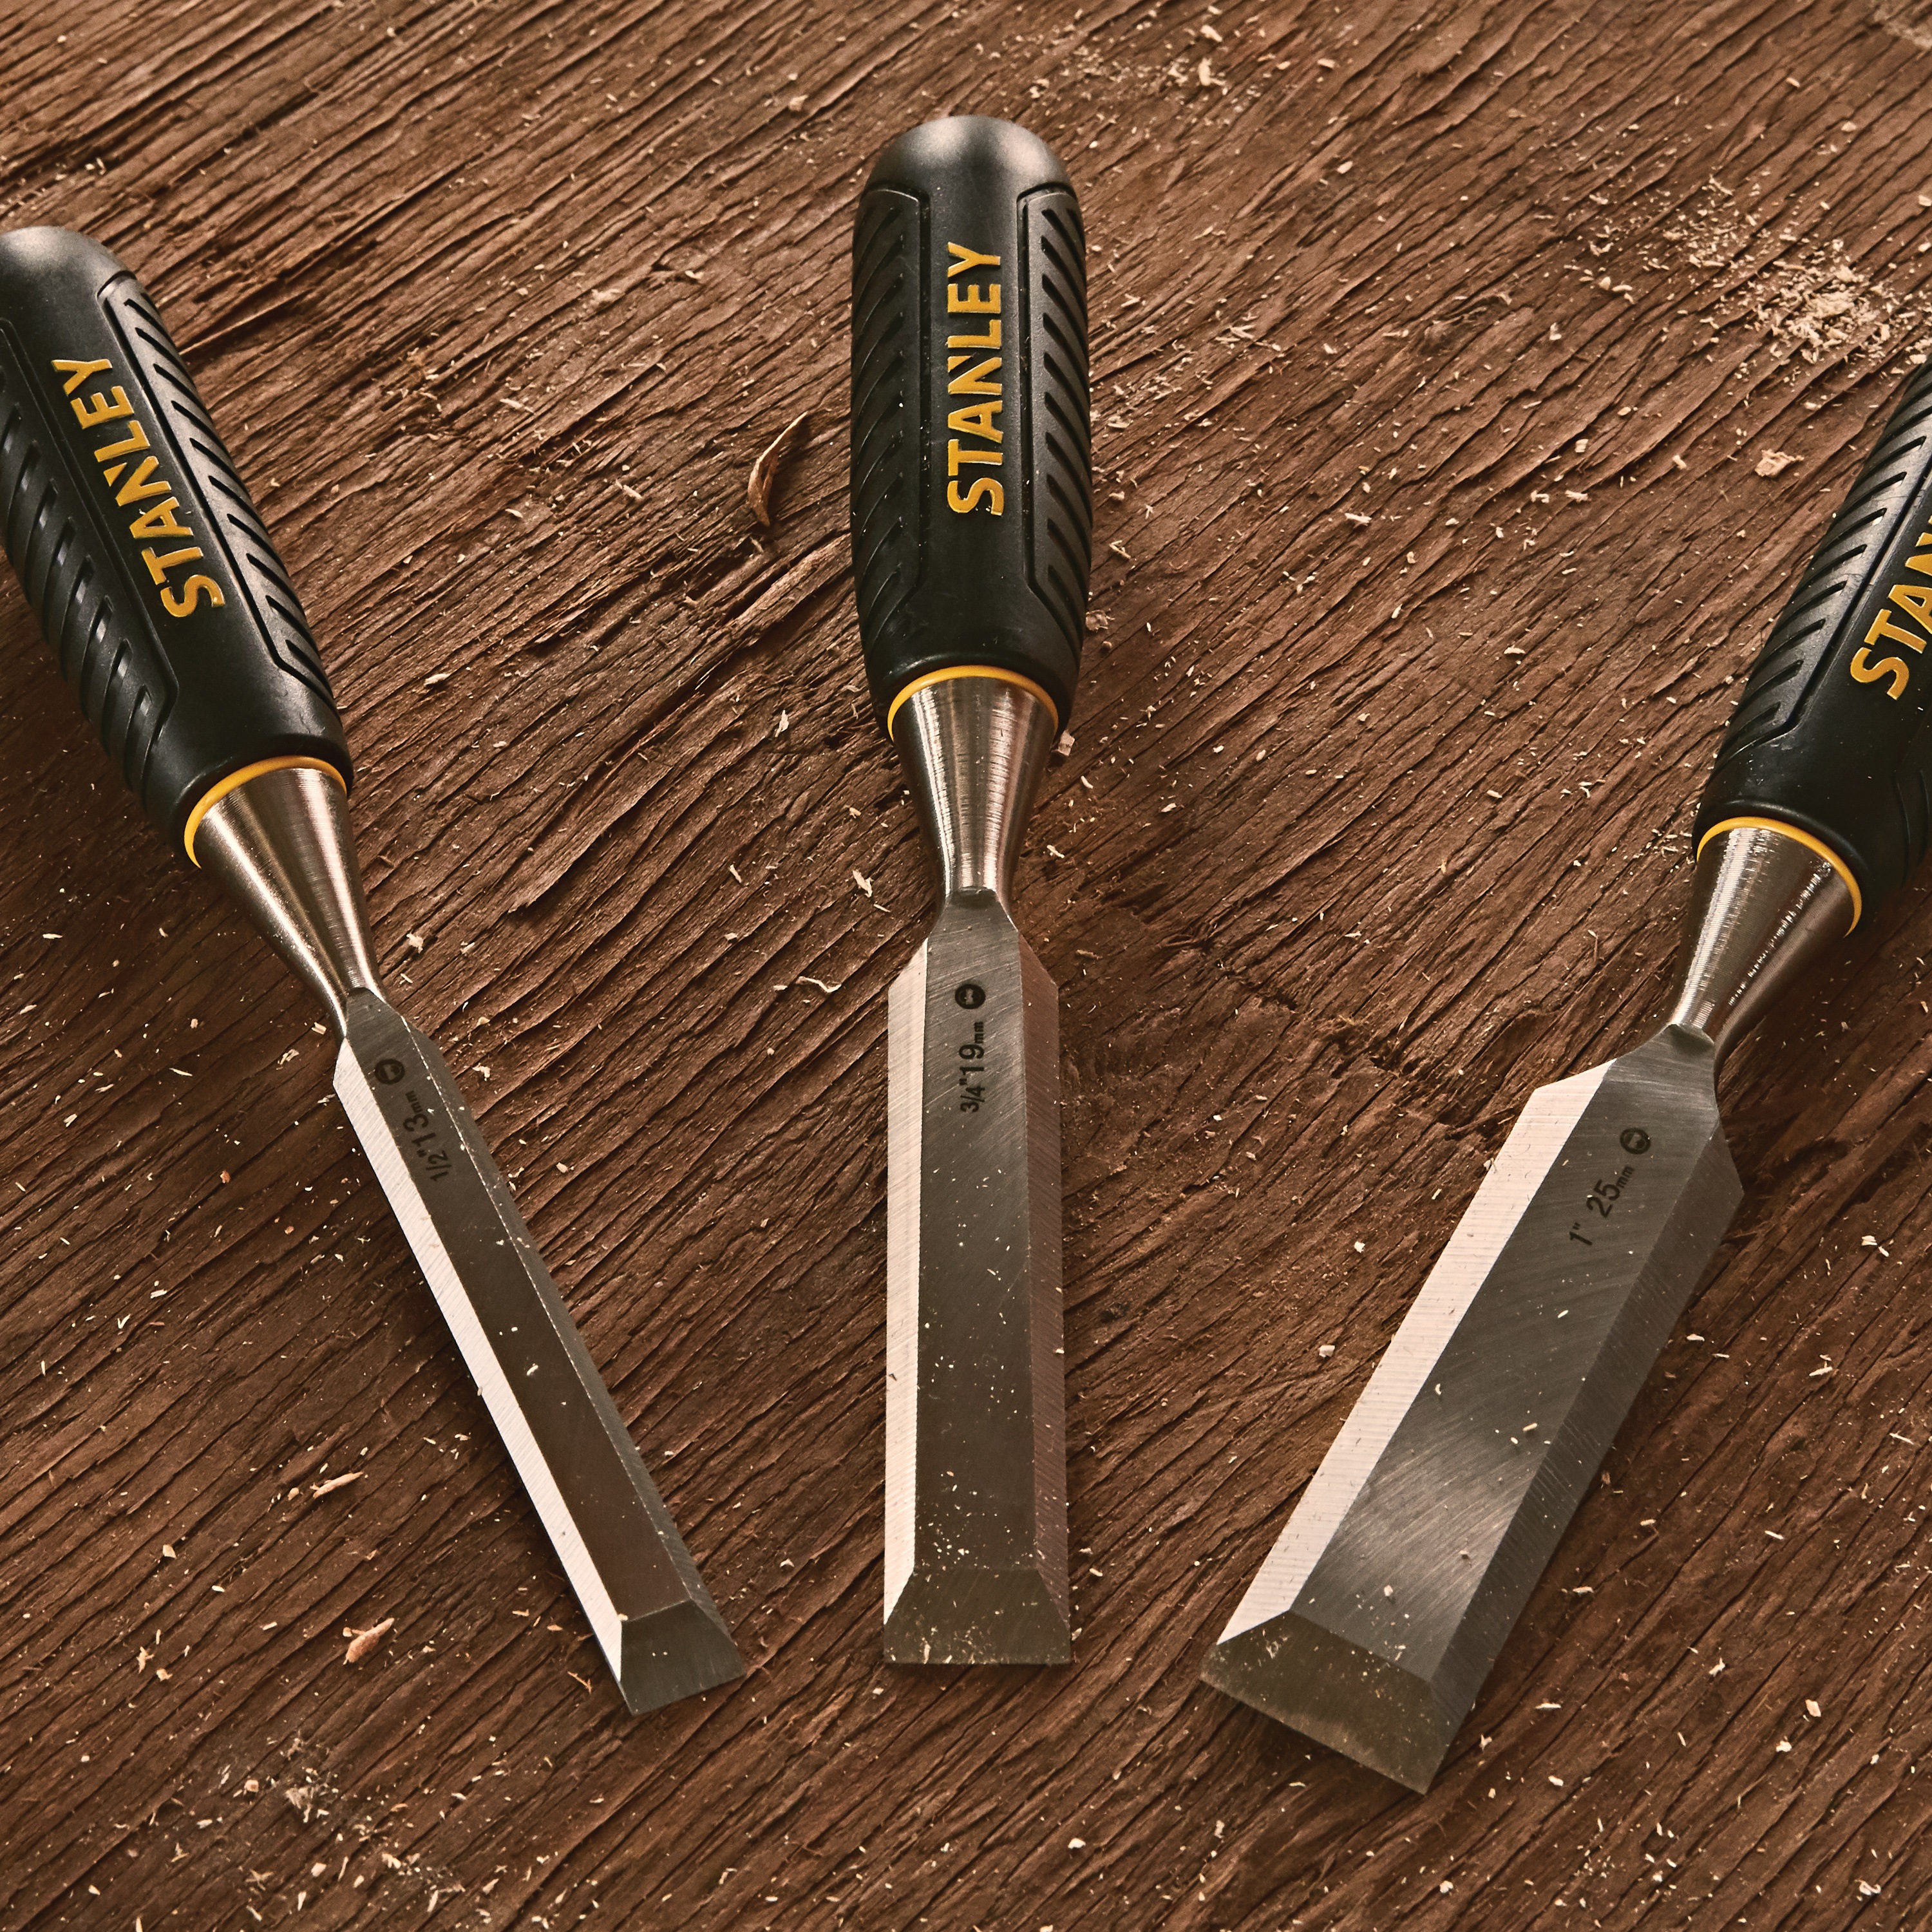 Stanley Tools - 3 pc Wood Chisel Set - STHT16727